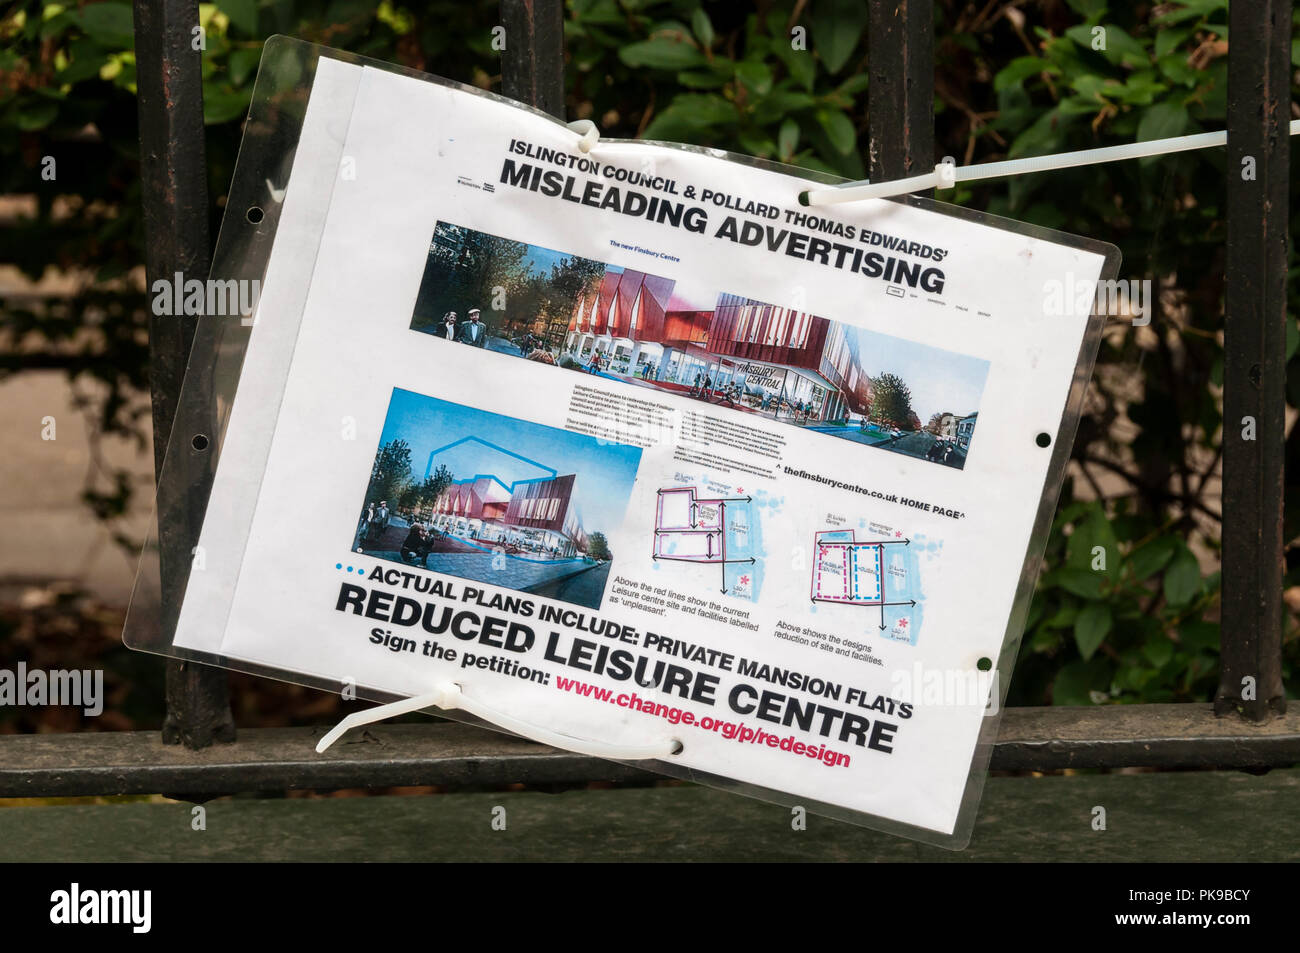 Poster accuses Islington Council & architects, Pollard Thomas Edwards, of misleading advertising over redevelopment of Finsbury Leisure Centre. Stock Photo